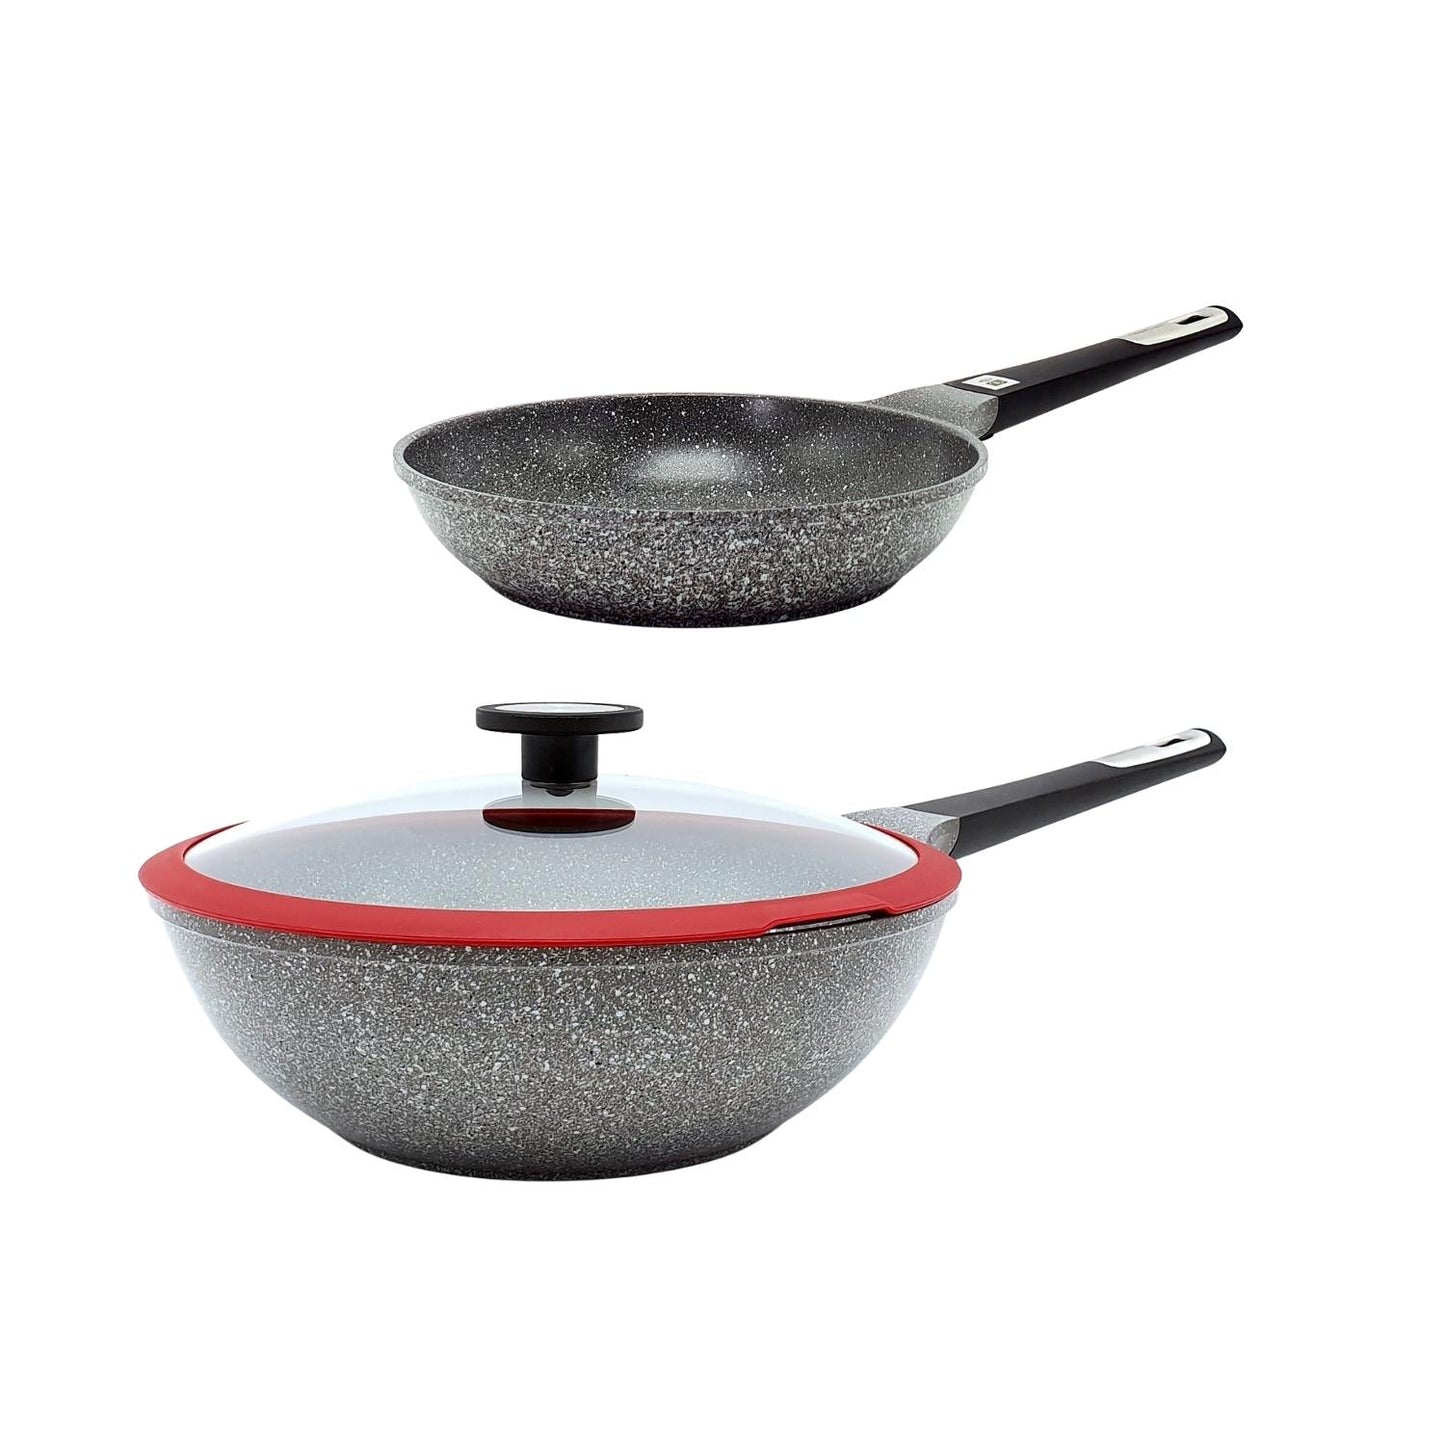 Neoflam Pote Essential 3-Piece Cookware Set